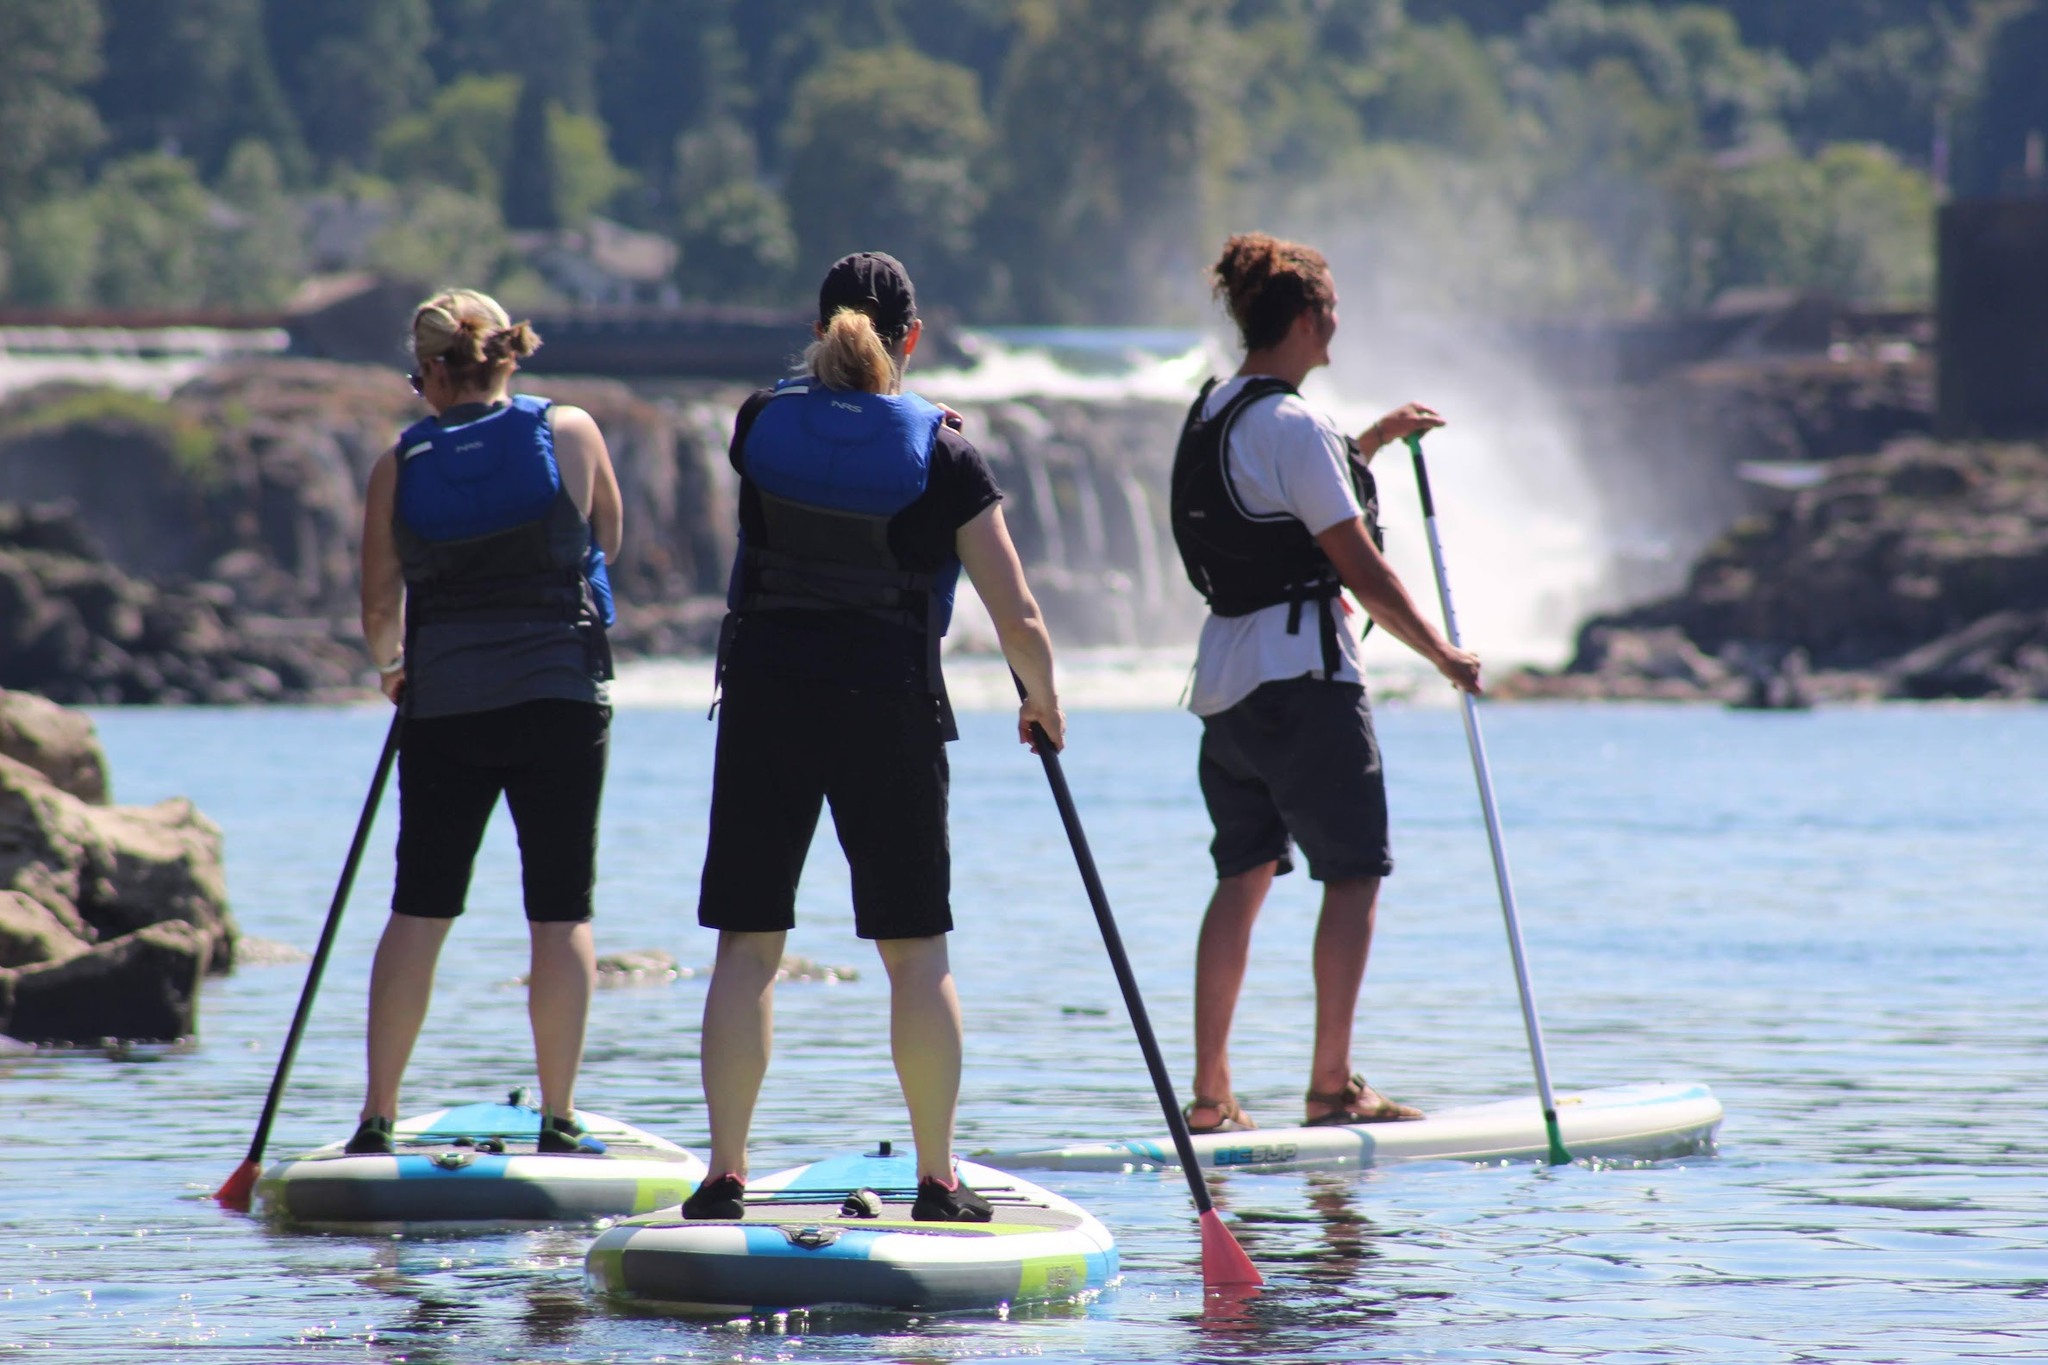 3 people on stand-up paddleboards look forward